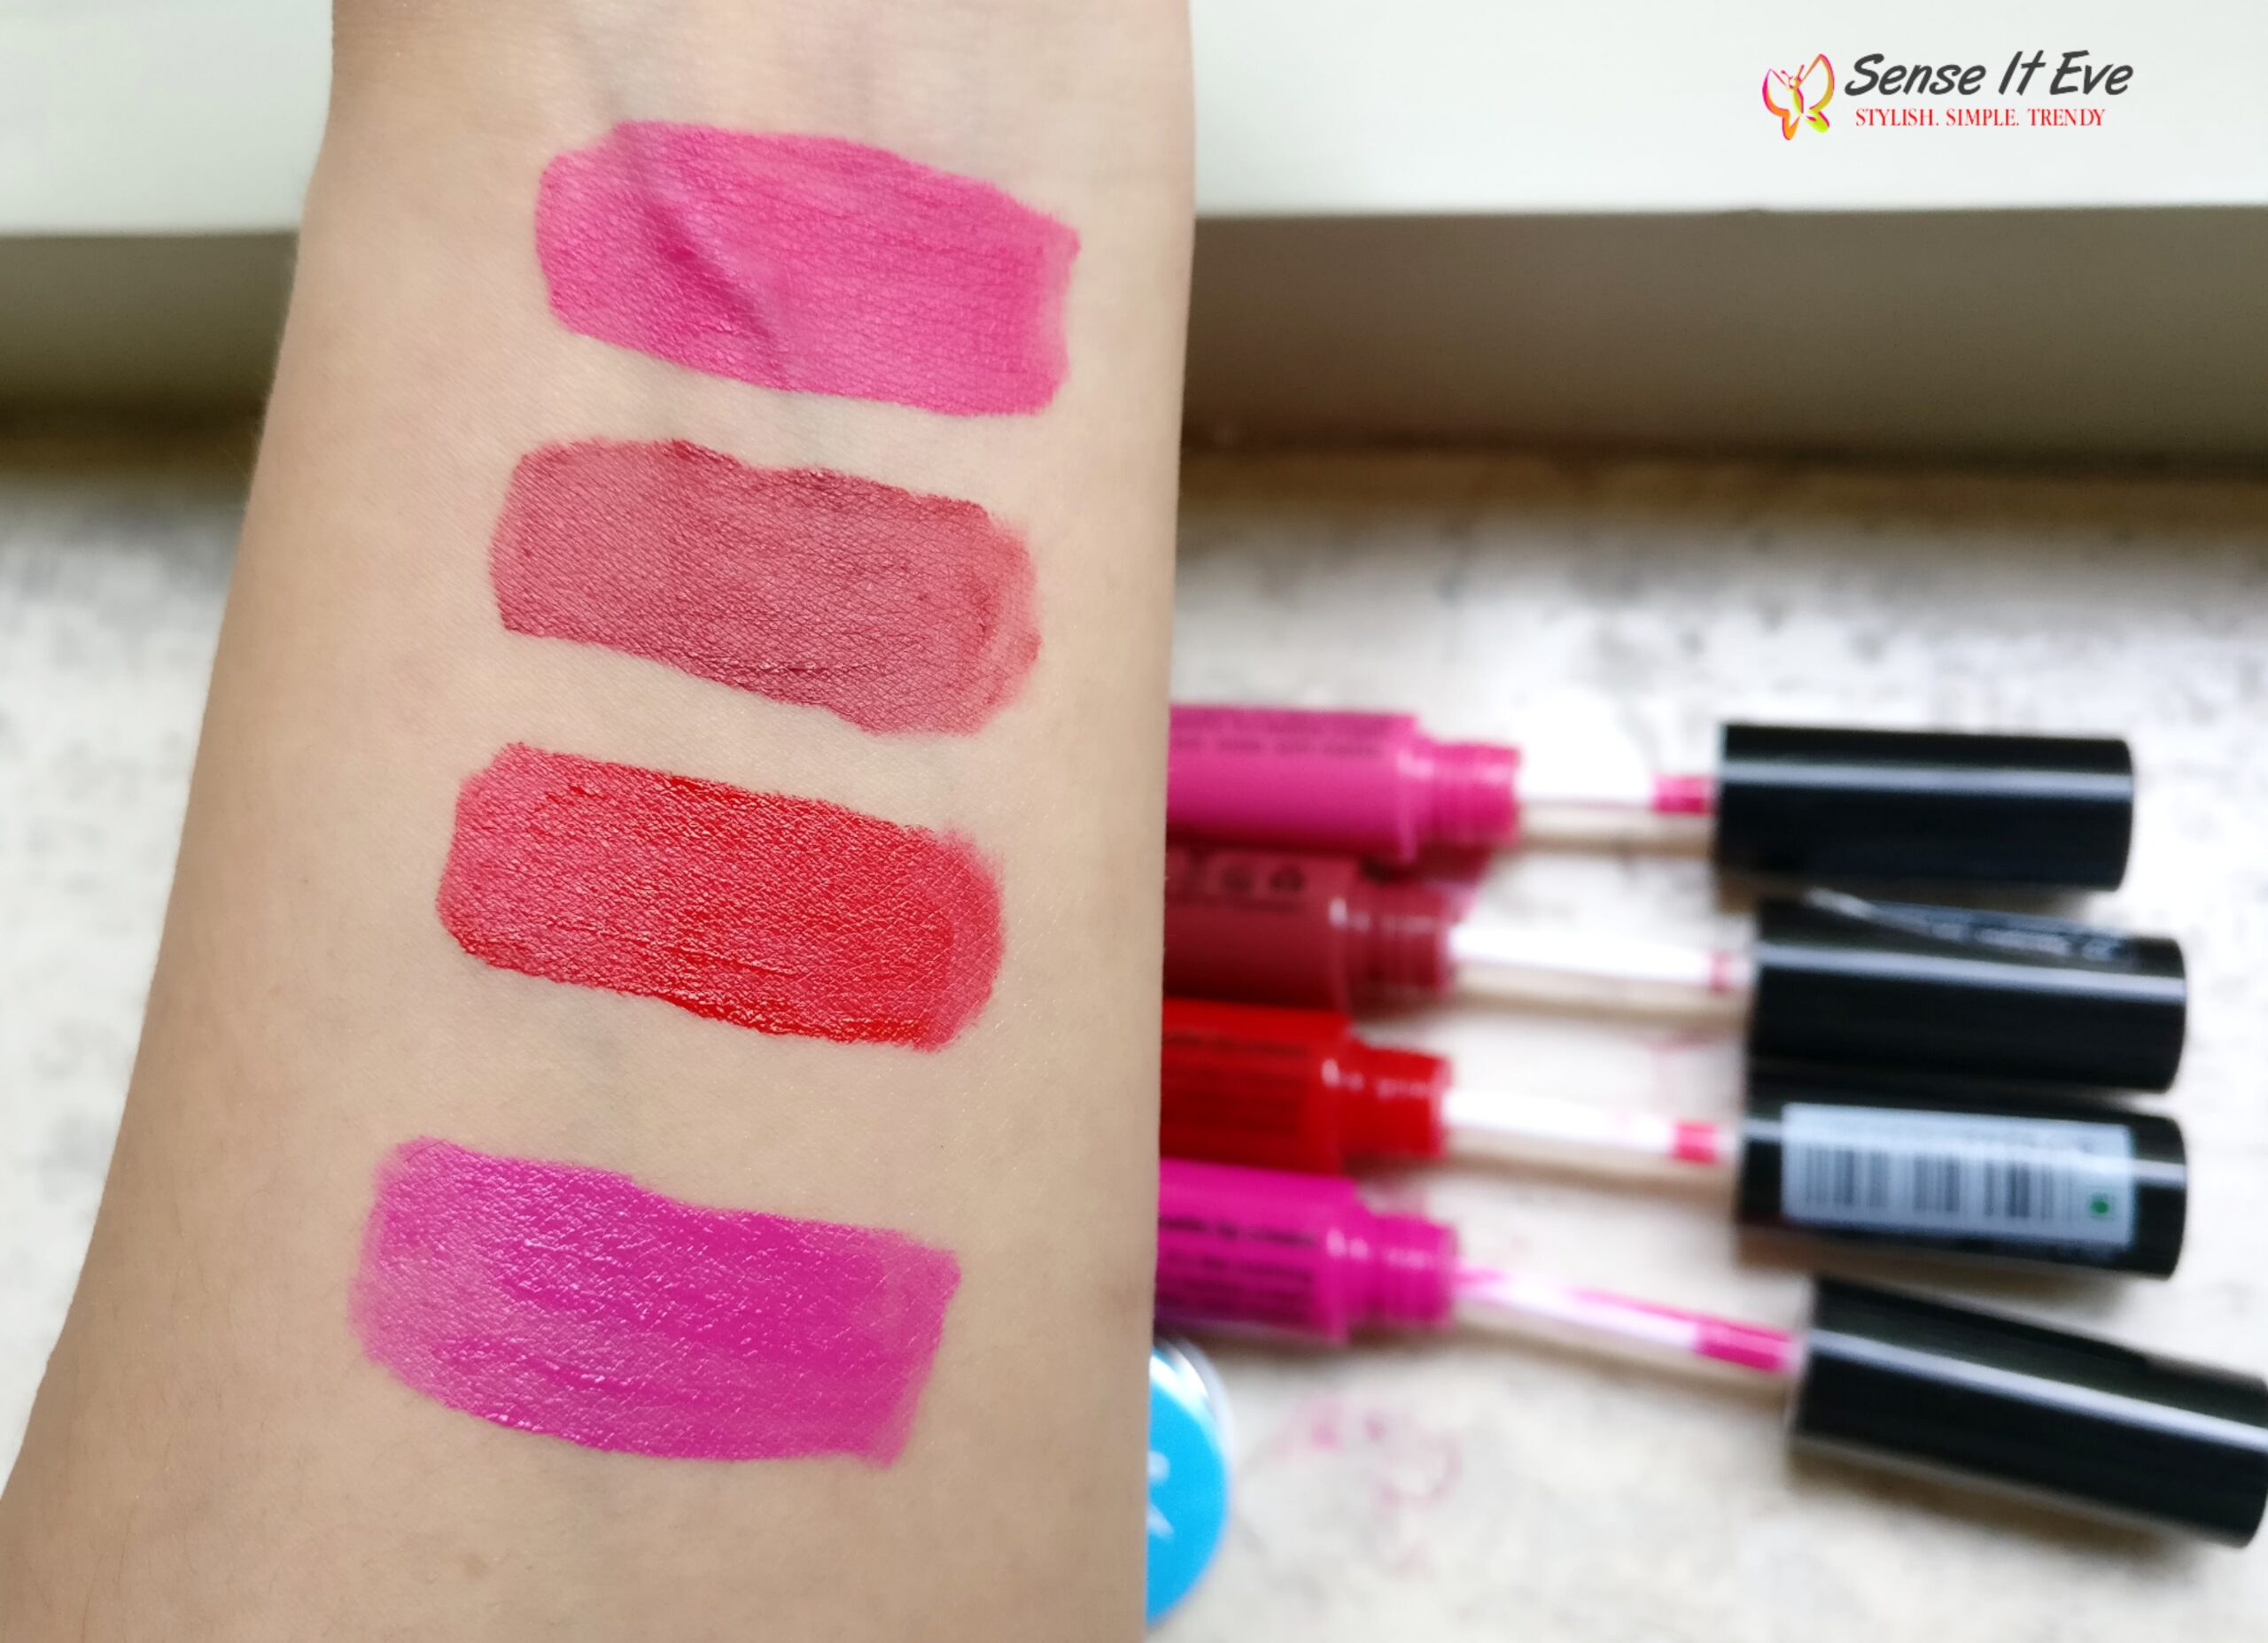 Miss Claire Soft Matte Lip Creams Swatches scaled Sense It Eve Miss Claire Soft Matte Lip Cream : Review & Swatches